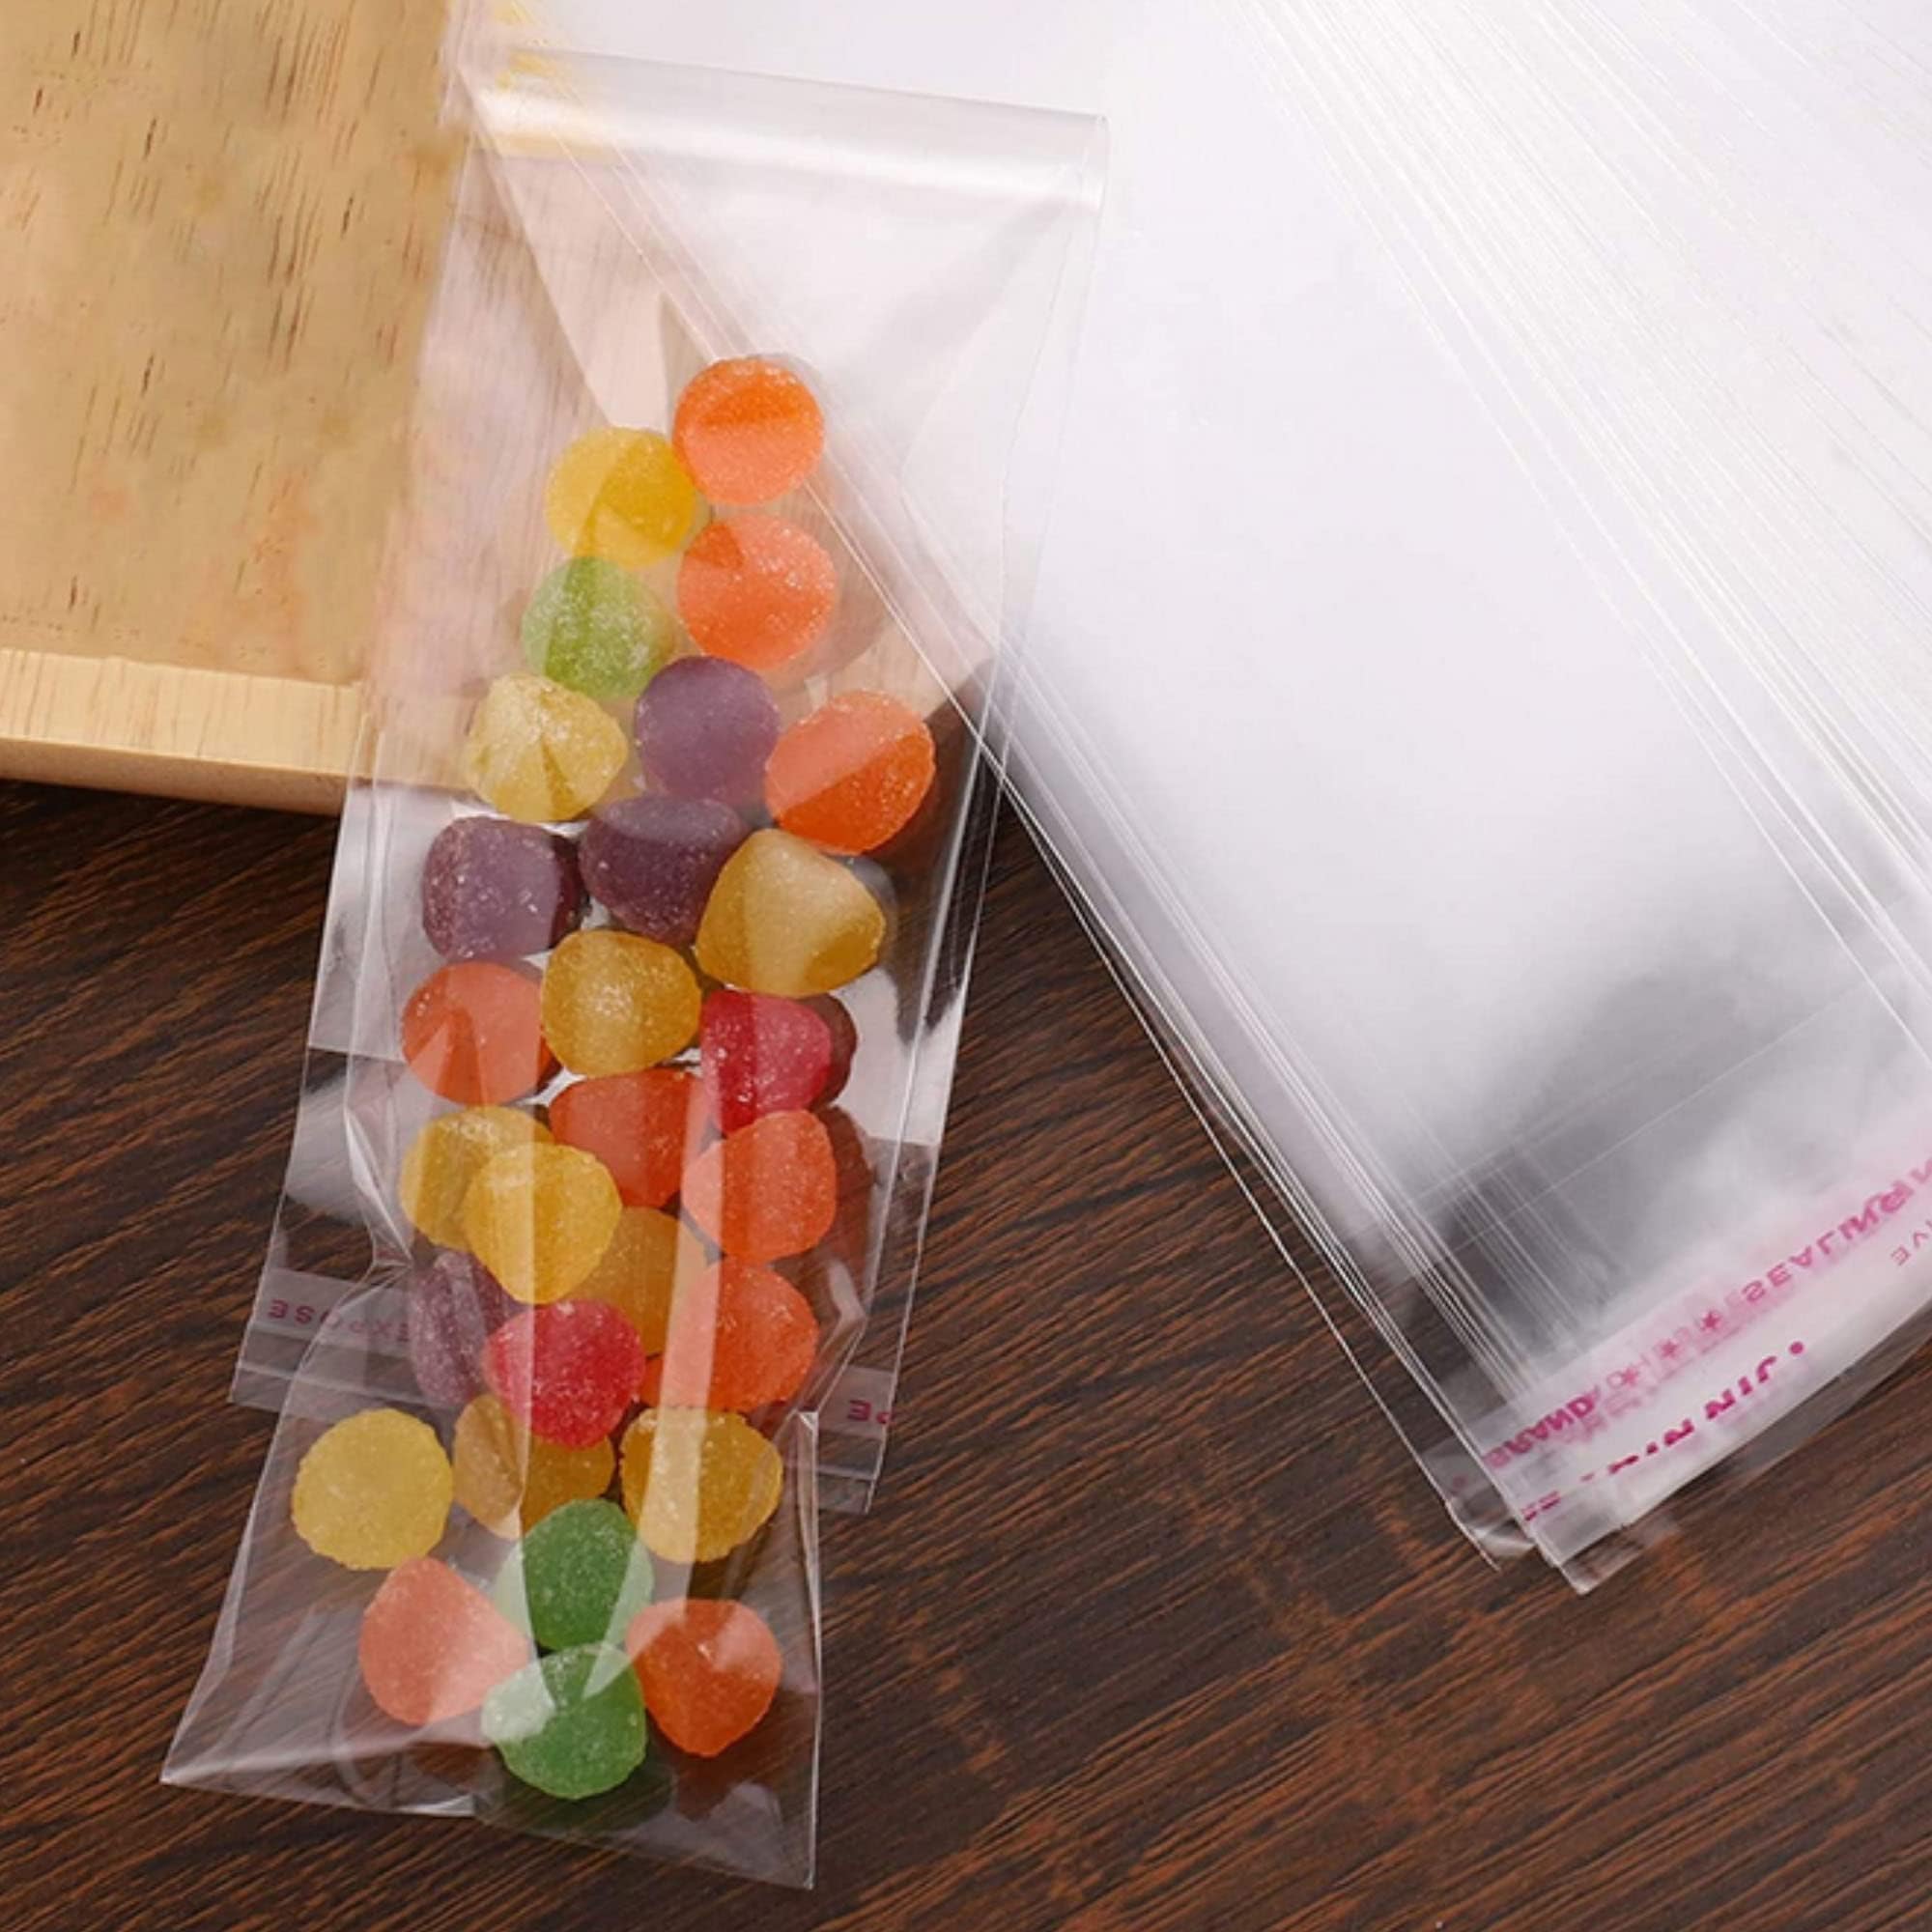 Adhesive Cellophane Bags Long 100pcs 2x6 inches Clear Self-adhesive Cello Bags 50µm Self Sealing OPP Plastic Bags for Candy Crayon Oil Pastel Key Chain Watch Hairpin Necklace